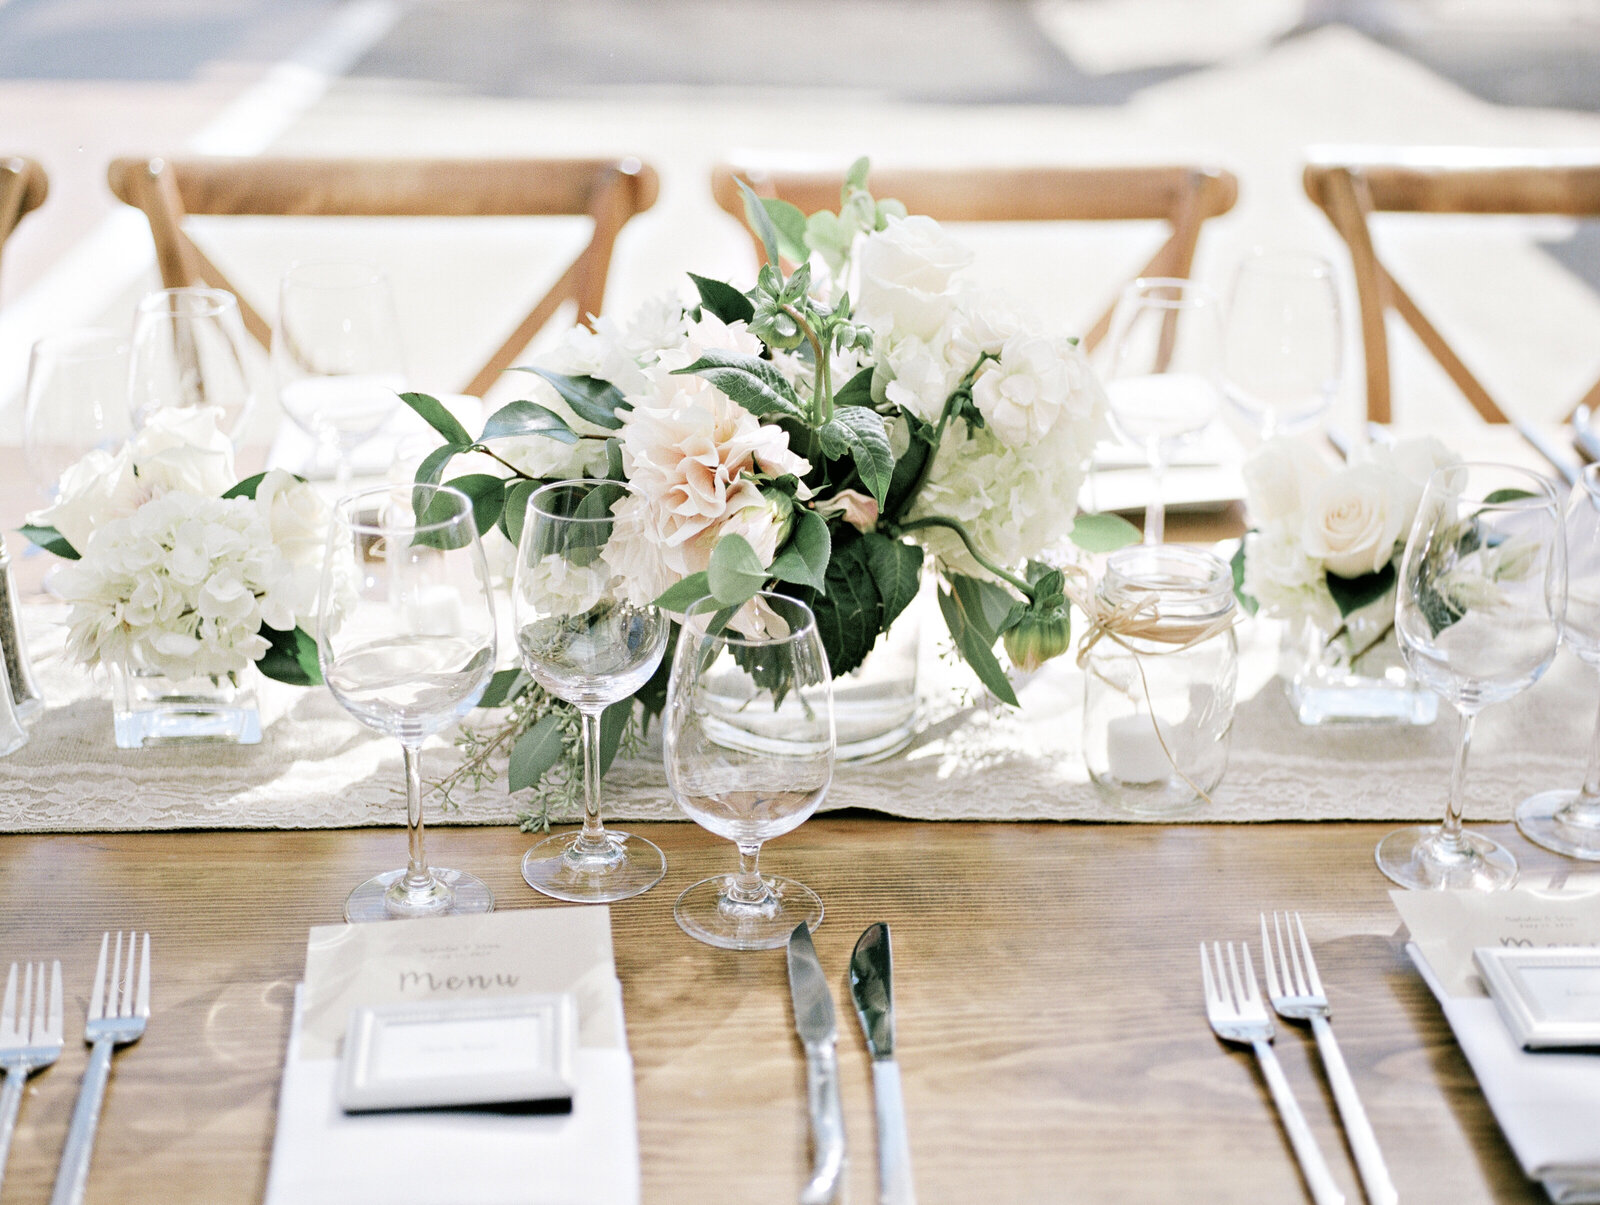 Wedding table place settings with greenery, flowers and glassware